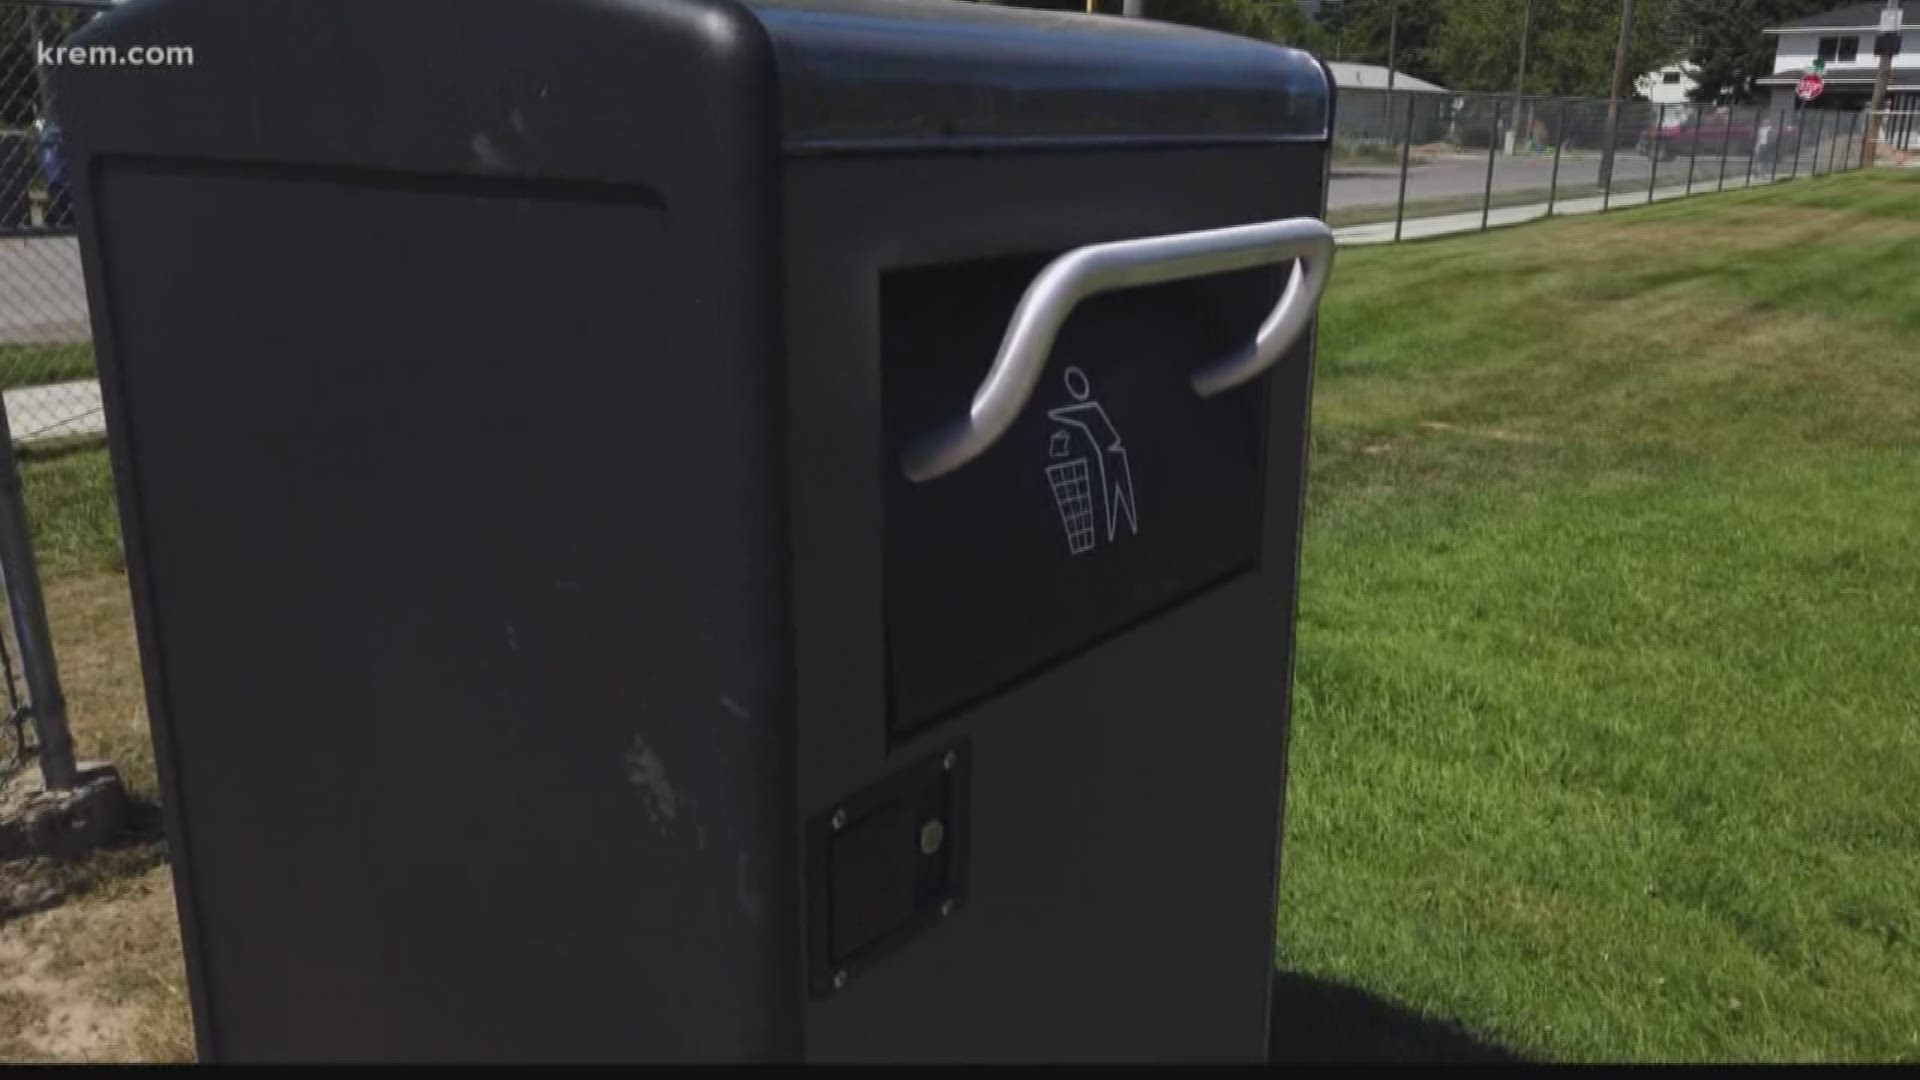 For the next two weeks Sandpoint will be hosting its annual festivals. More than 4-thousand visitors are expected to stream into town. And with that comes a lot more trash. City officials got in front of the wave with new "smart" trash bins.